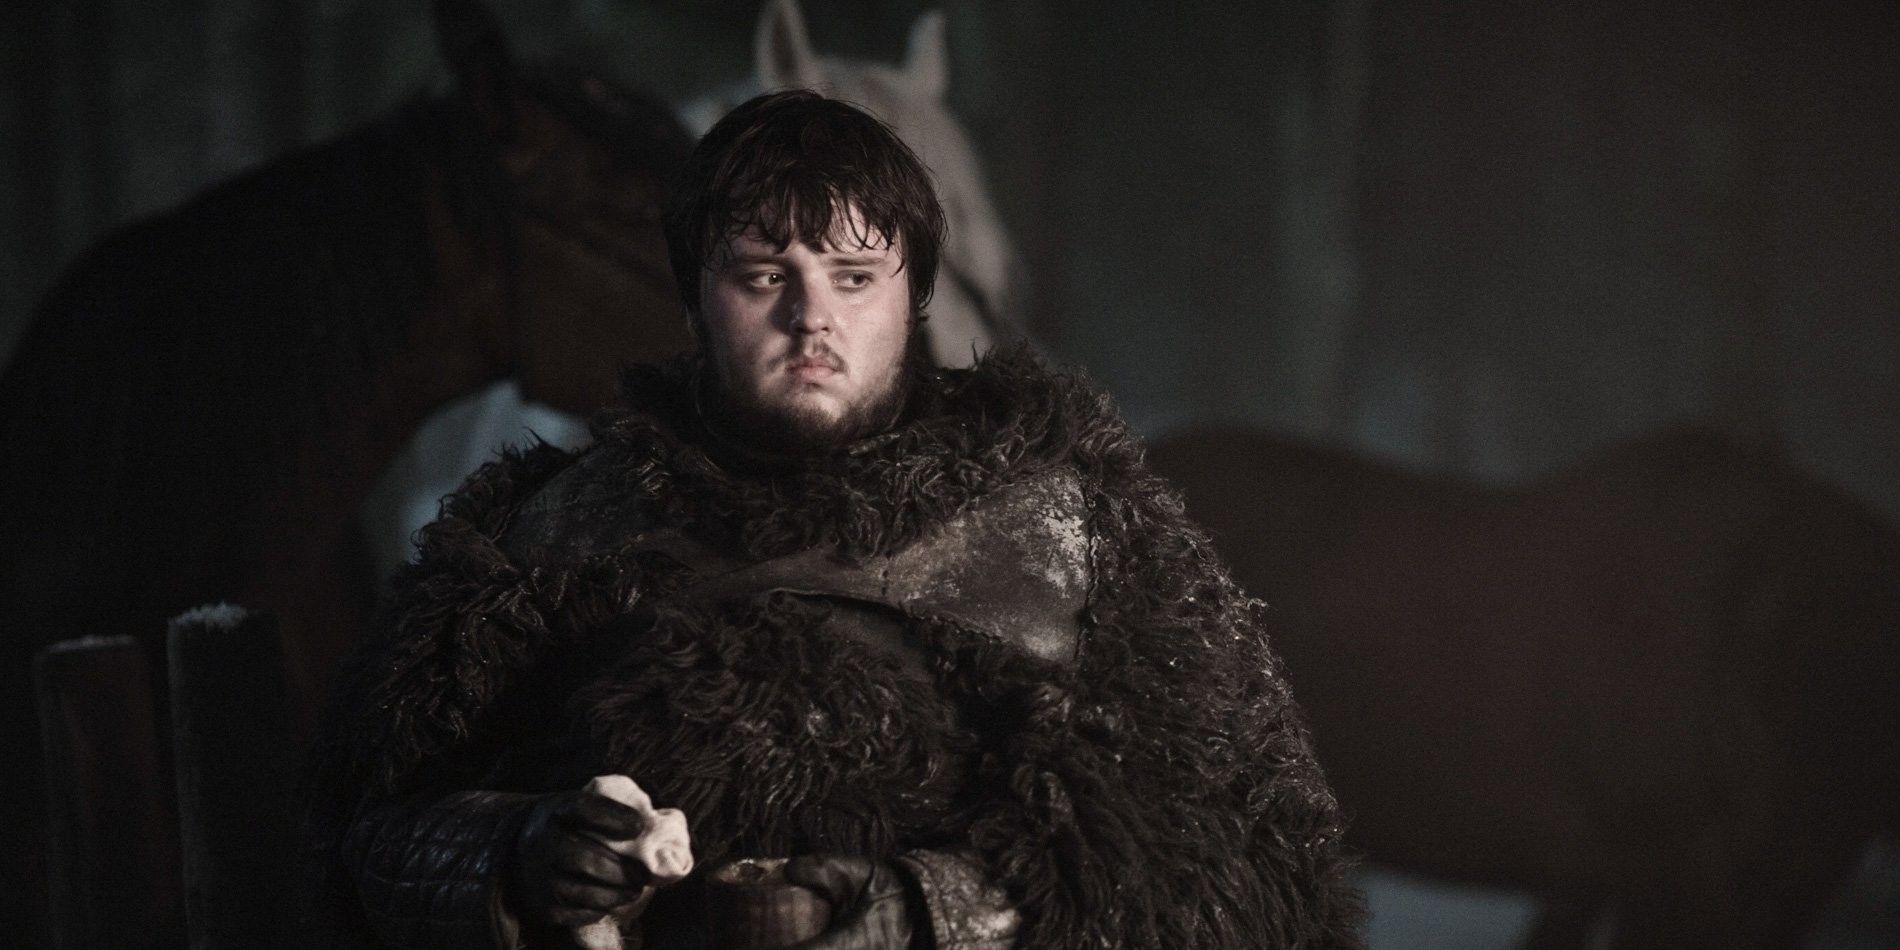 Game Of Thrones 5 Times Samwell Tarly Was An Overrated Character (& 5 Times He Was Underrated)